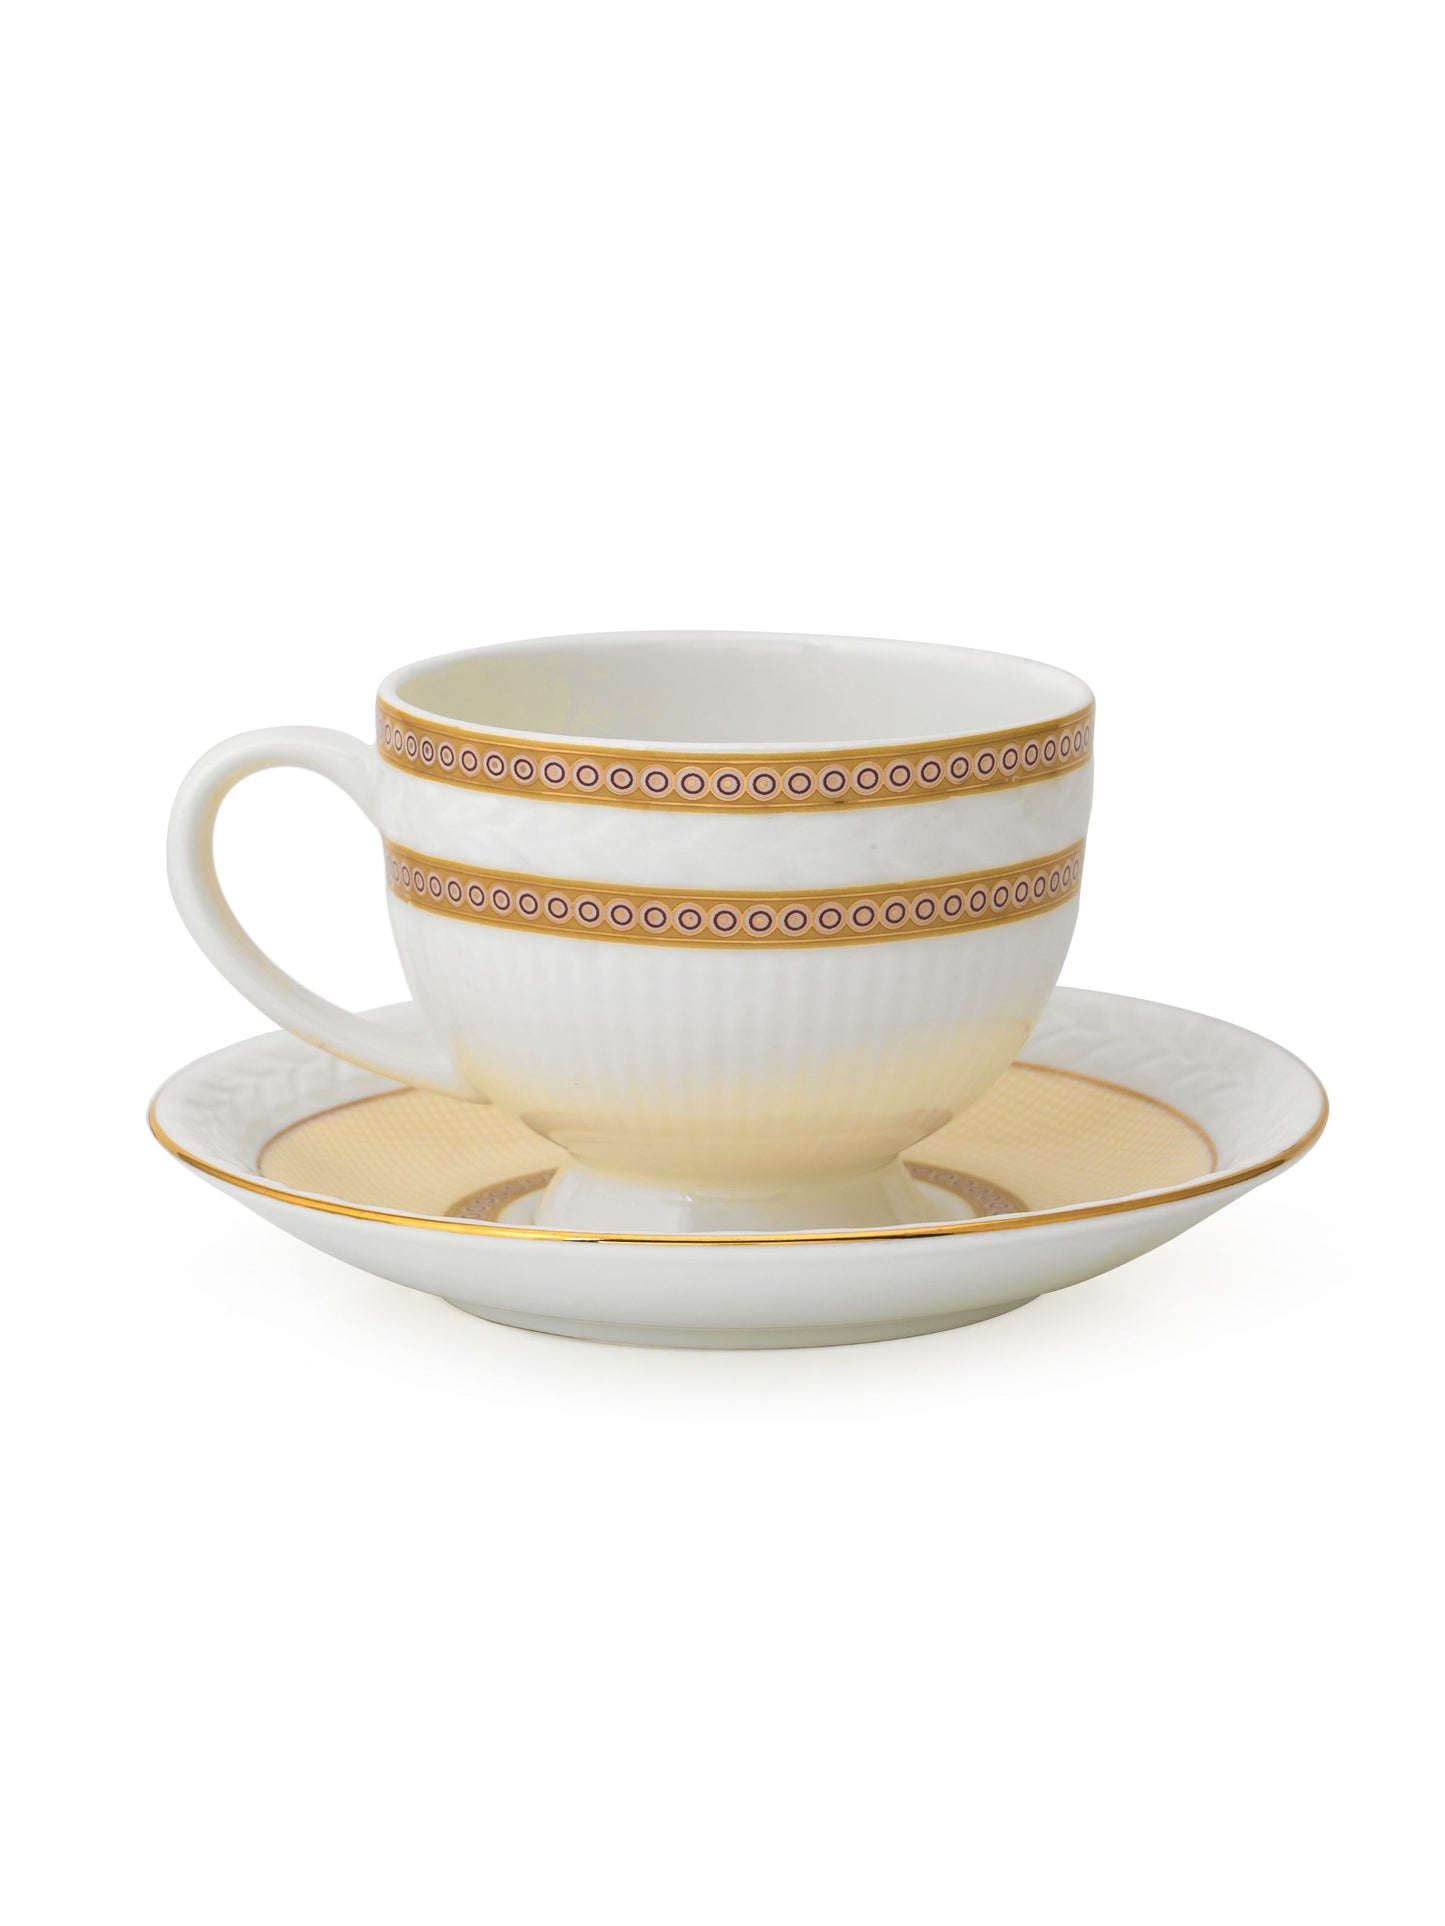 Snow Impression Cup & Saucer, 170 ml, Set of 12 (6 Cups + 6 Saucers) (1404)